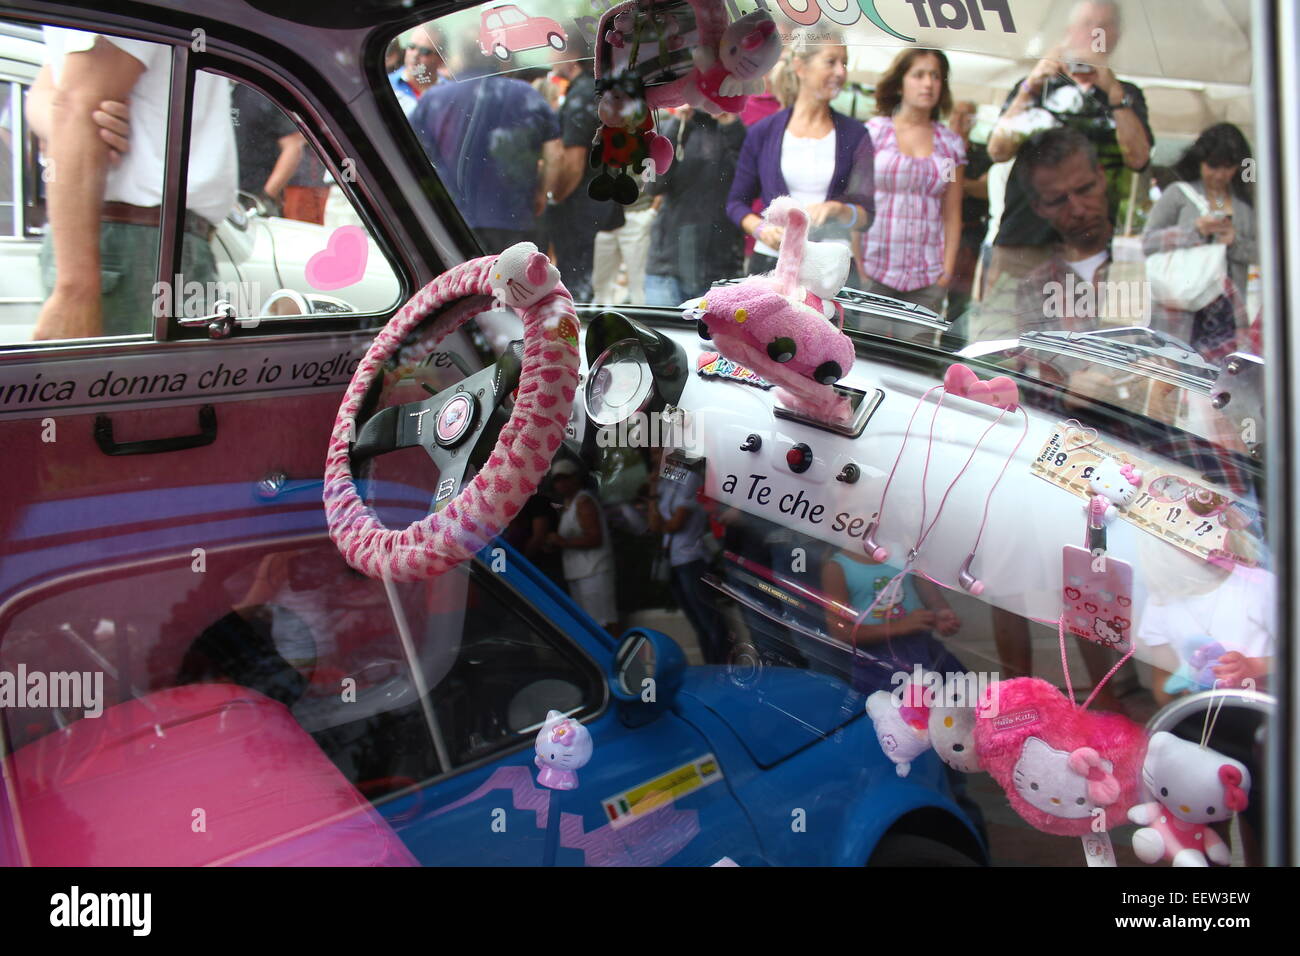 Fiat 500 Hello Kitty pink interior Banque D'Images